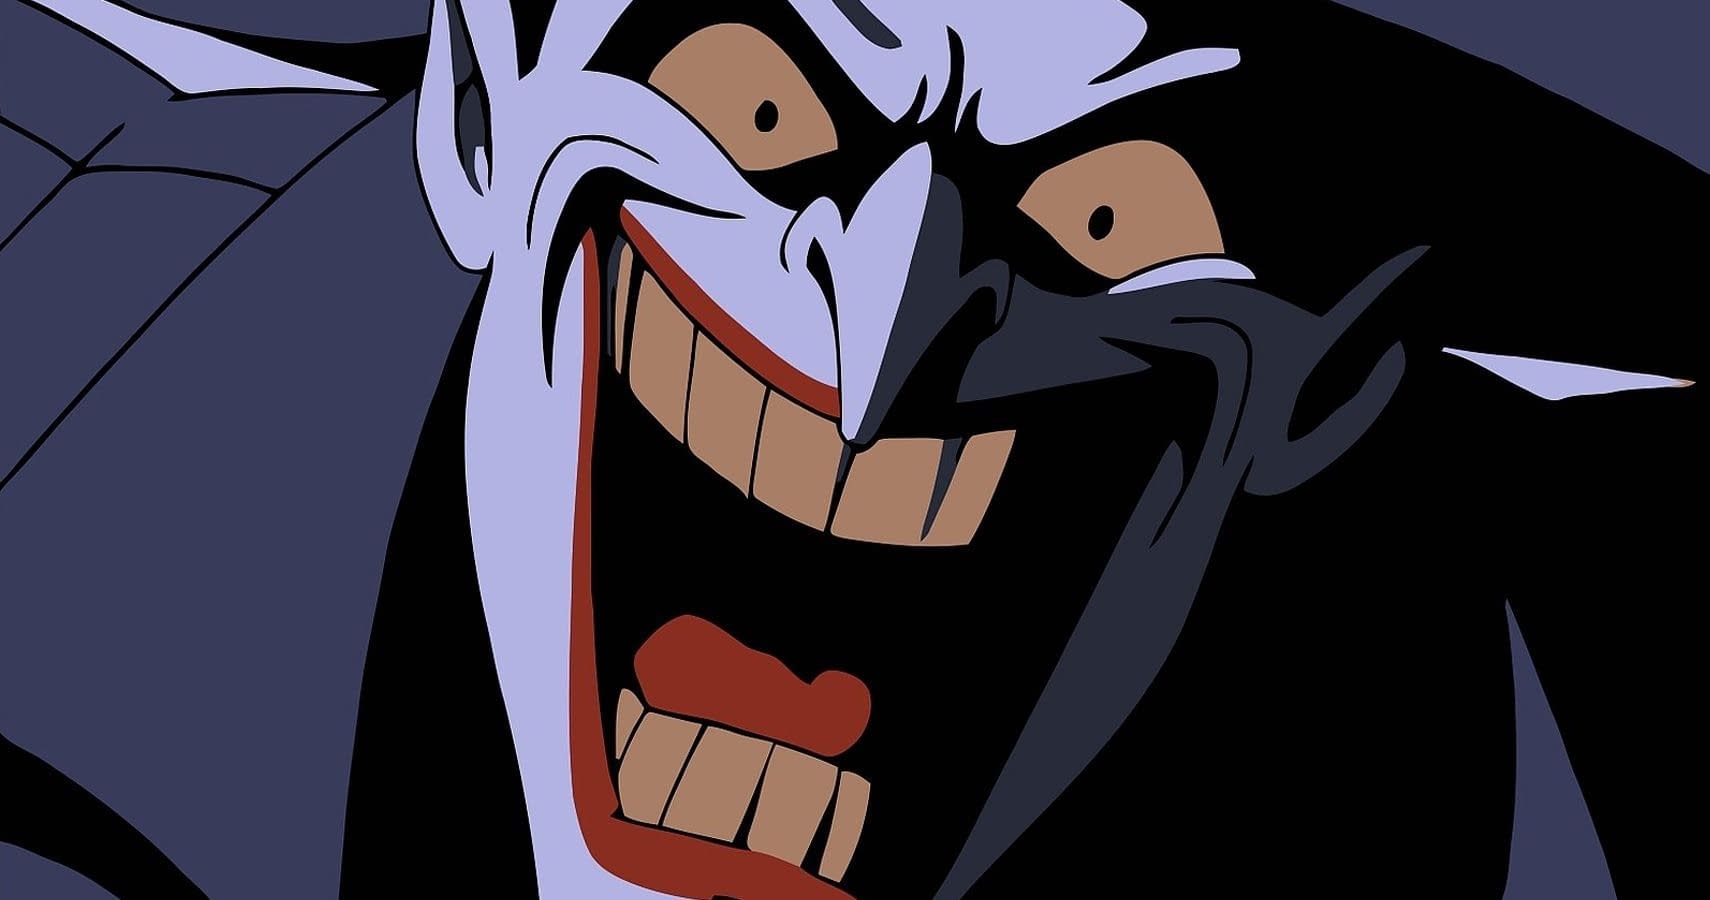 3. The Joker's blonde hair in the animated series "The Batman" - wide 6